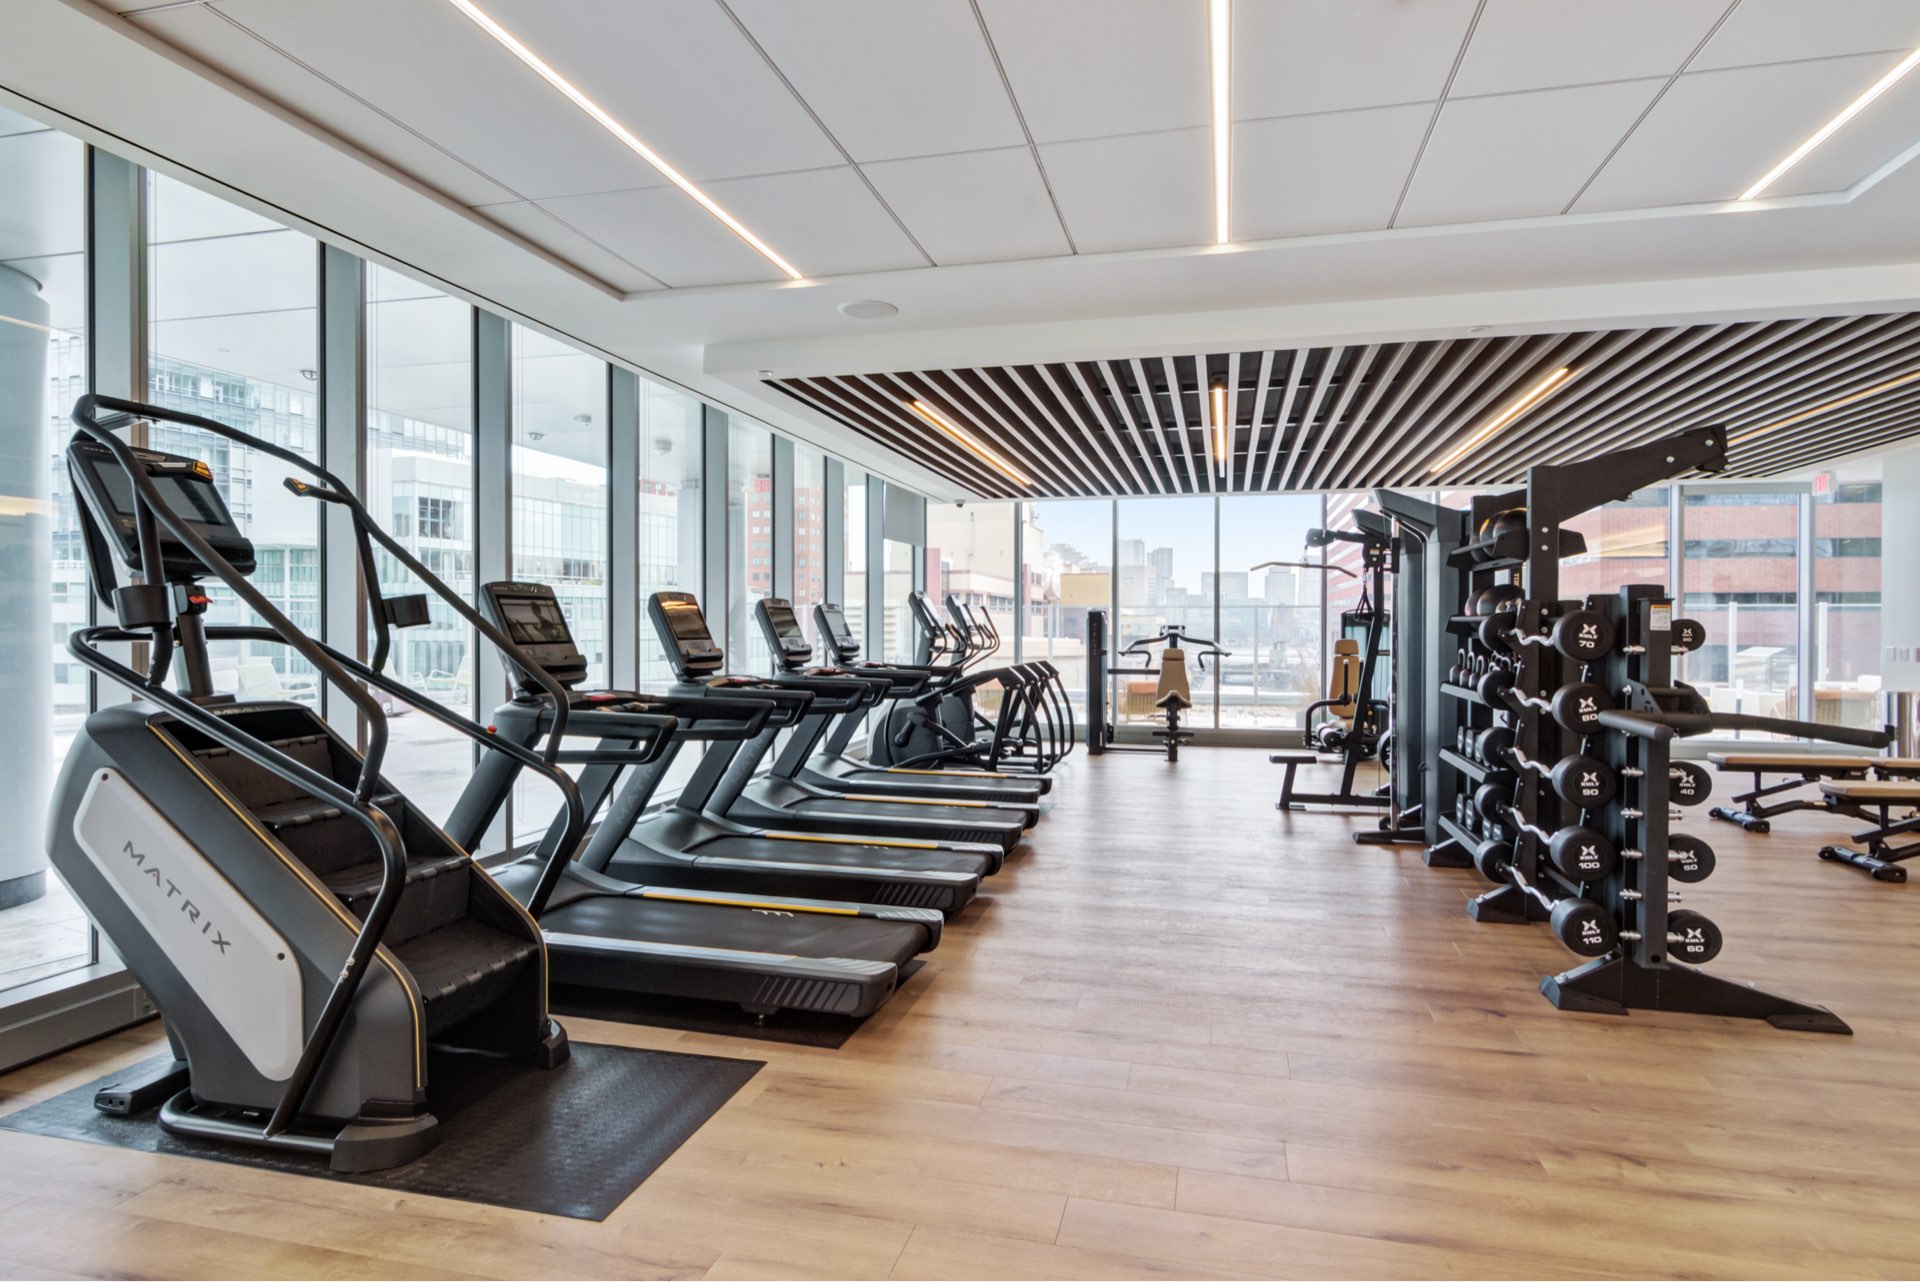 Spacious gym facility with a row of modern treadmills and a well-organized rack of dumbbells, set against a backdrop of warm brown wooden flooring